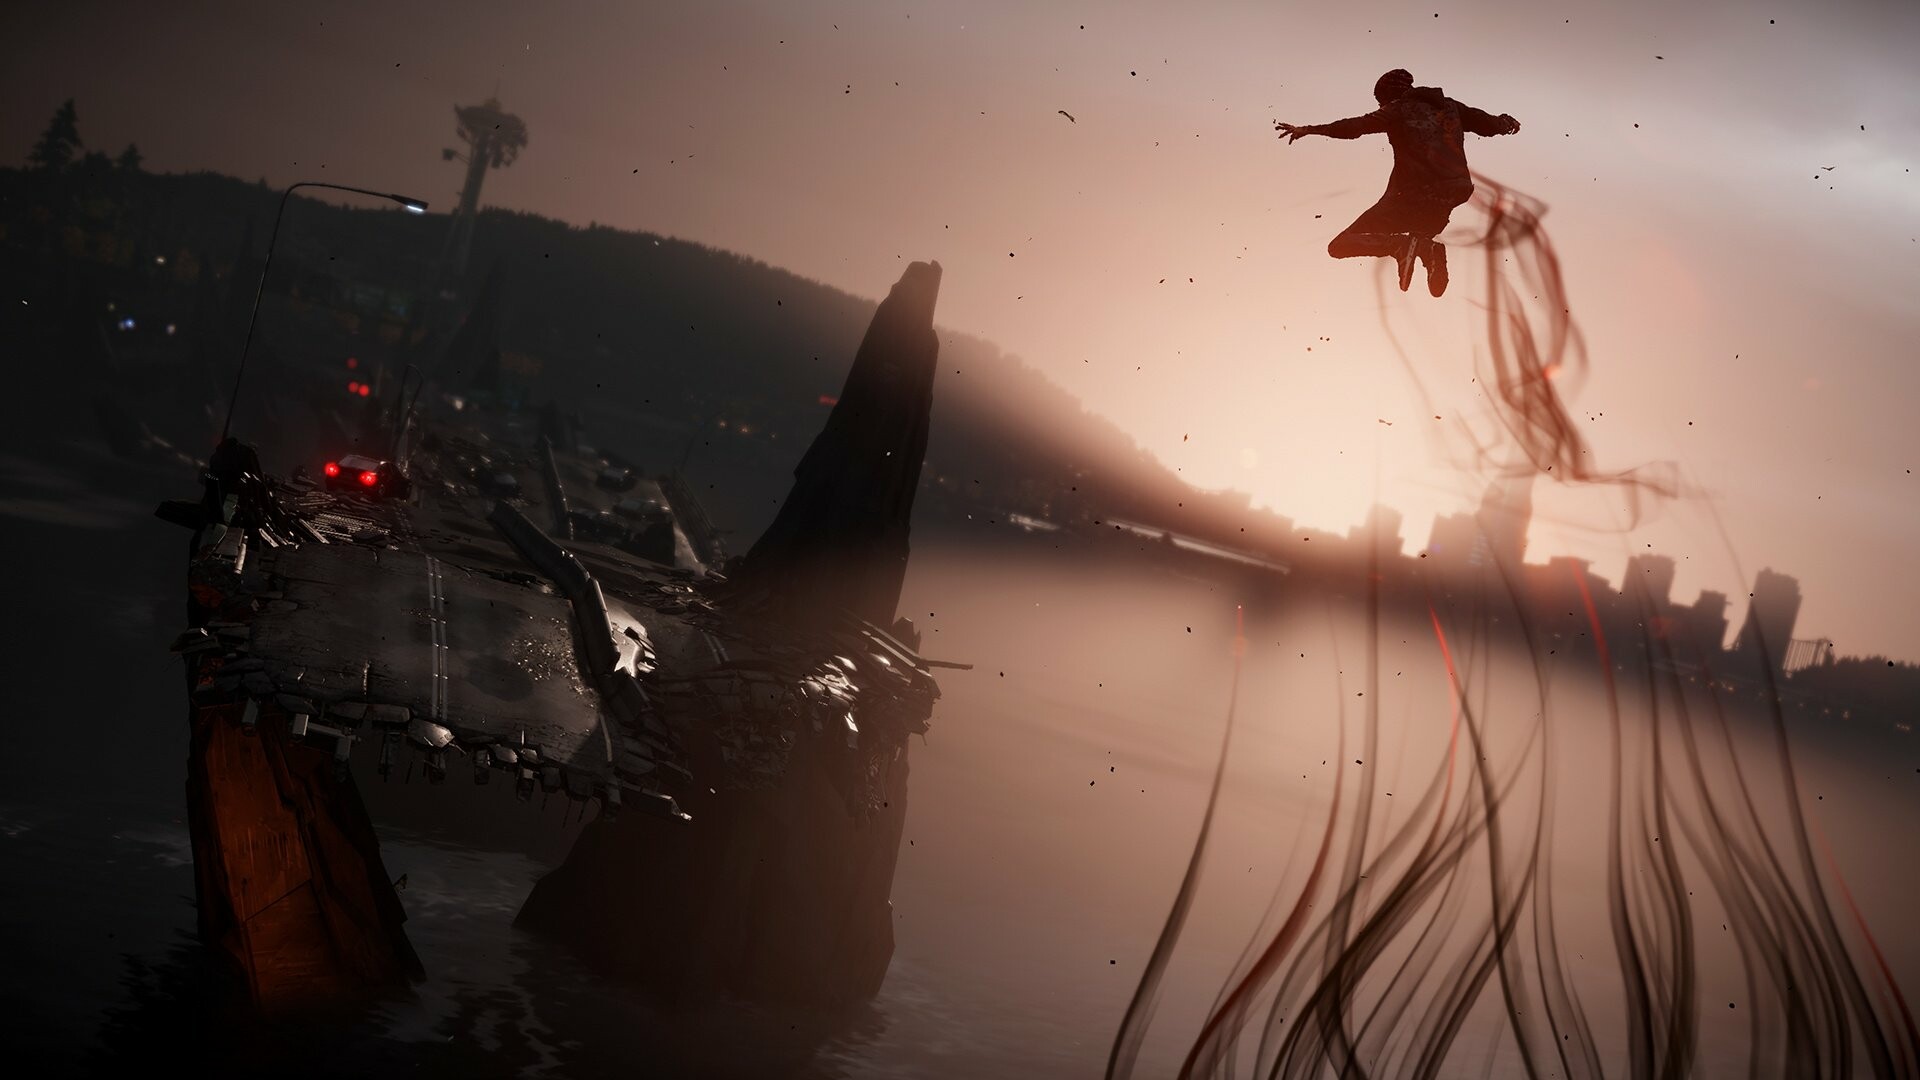 inFAMOUS: A series of open-world games which follow special individuals called Conduits. 1920x1080 Full HD Wallpaper.